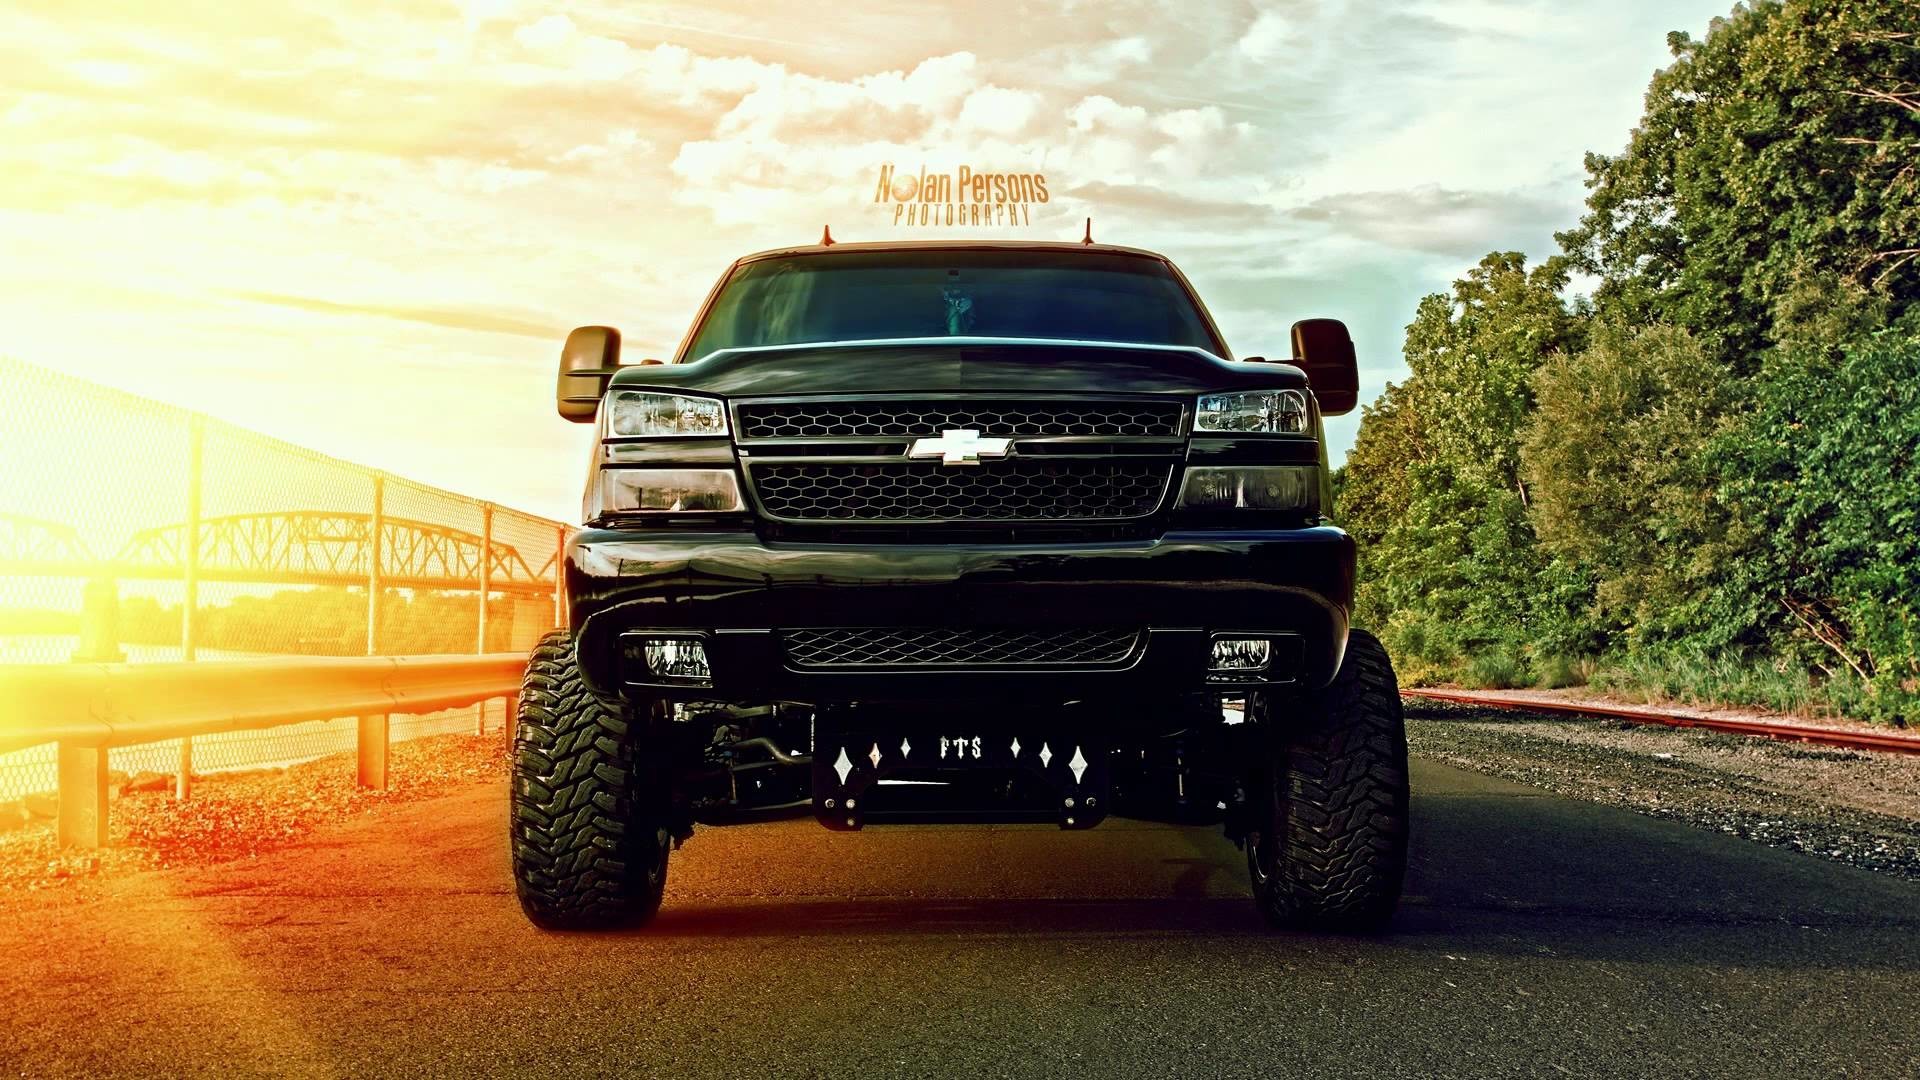 1920x1080 Image detail for Lifted chevy trucks wallpaper Badass cars and 1600Ã1200  Lifted Truck Wallpapers (45 Wallpapers) | Adorable Wallpapers | Desktop |  Pinterest ...